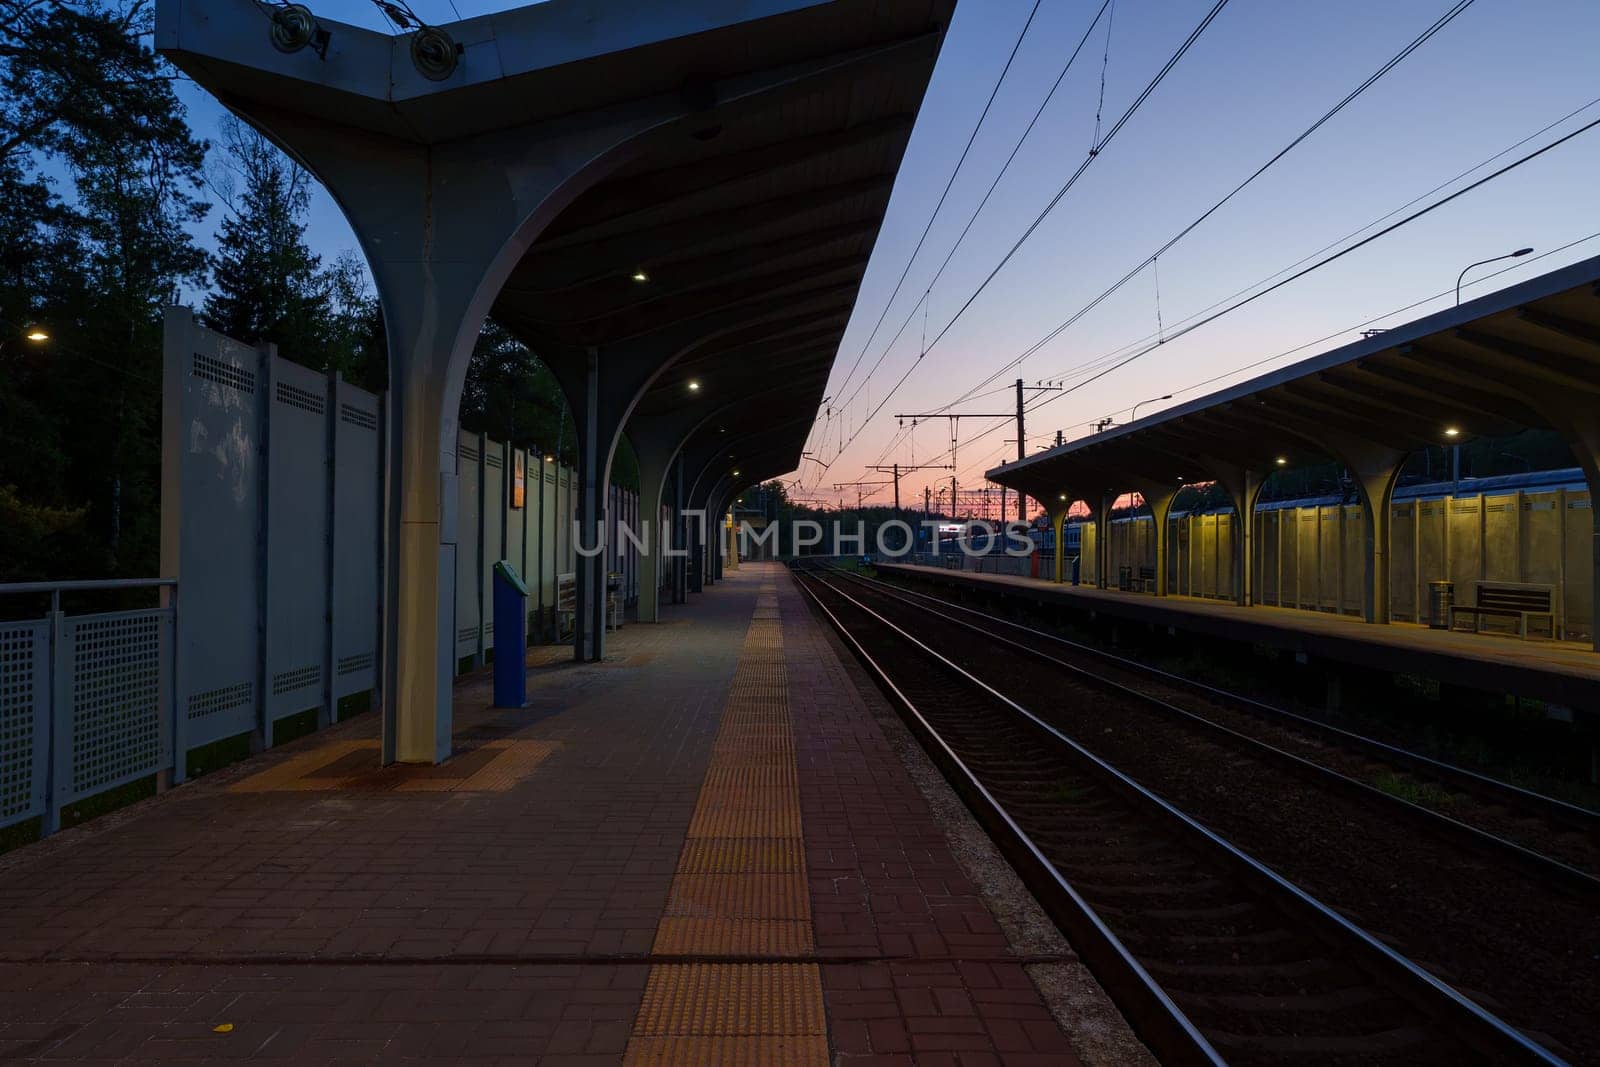 A beautiful railway station in the rays of a colorful sunset. Taking a picture using a wide-angle lens. High quality photo